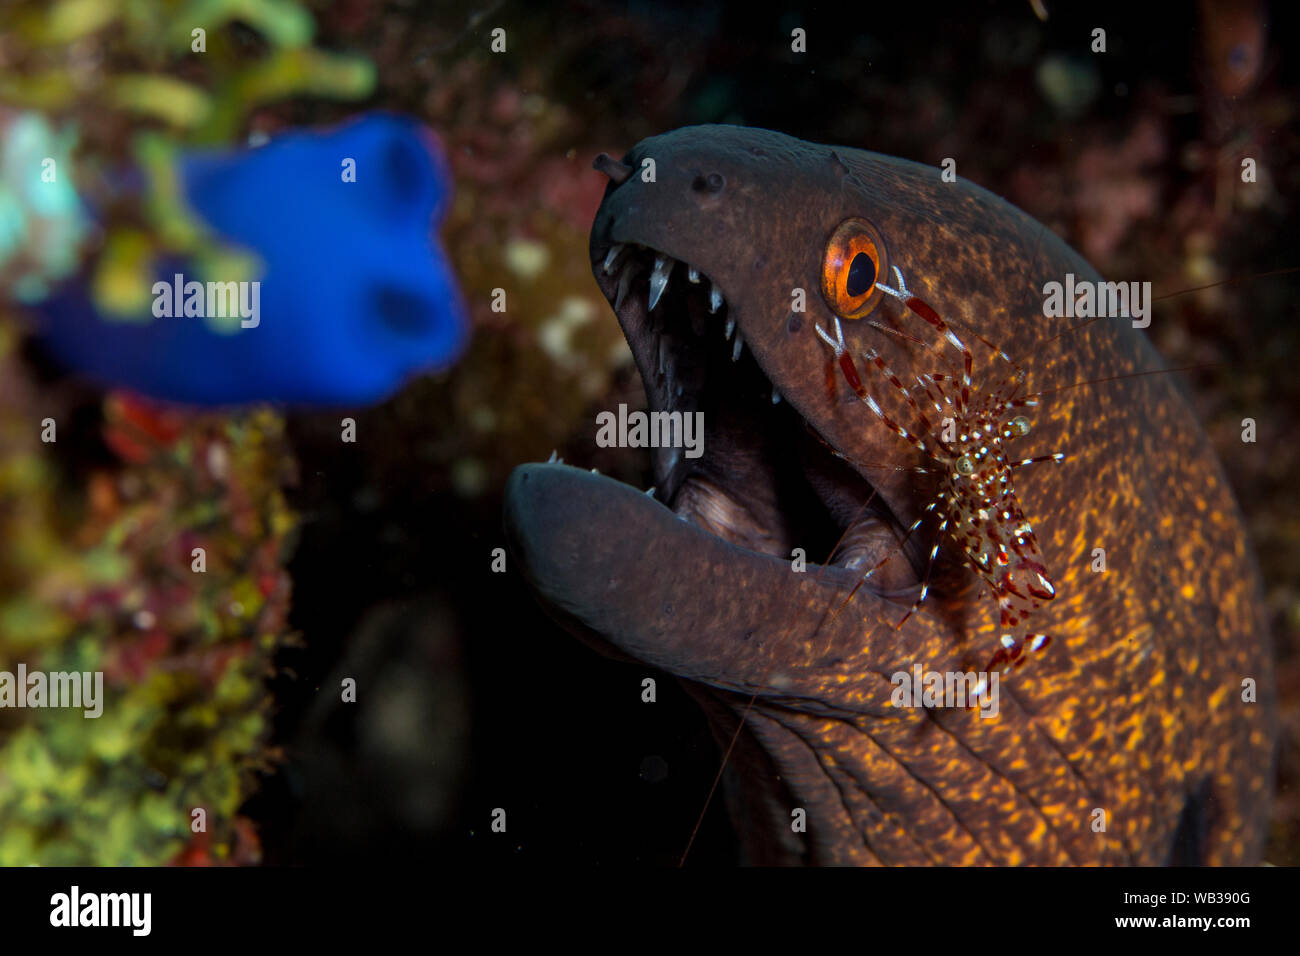 Moray Eel Manicured by Cleaner Shrimp, Bali Indonesia Stock Photo